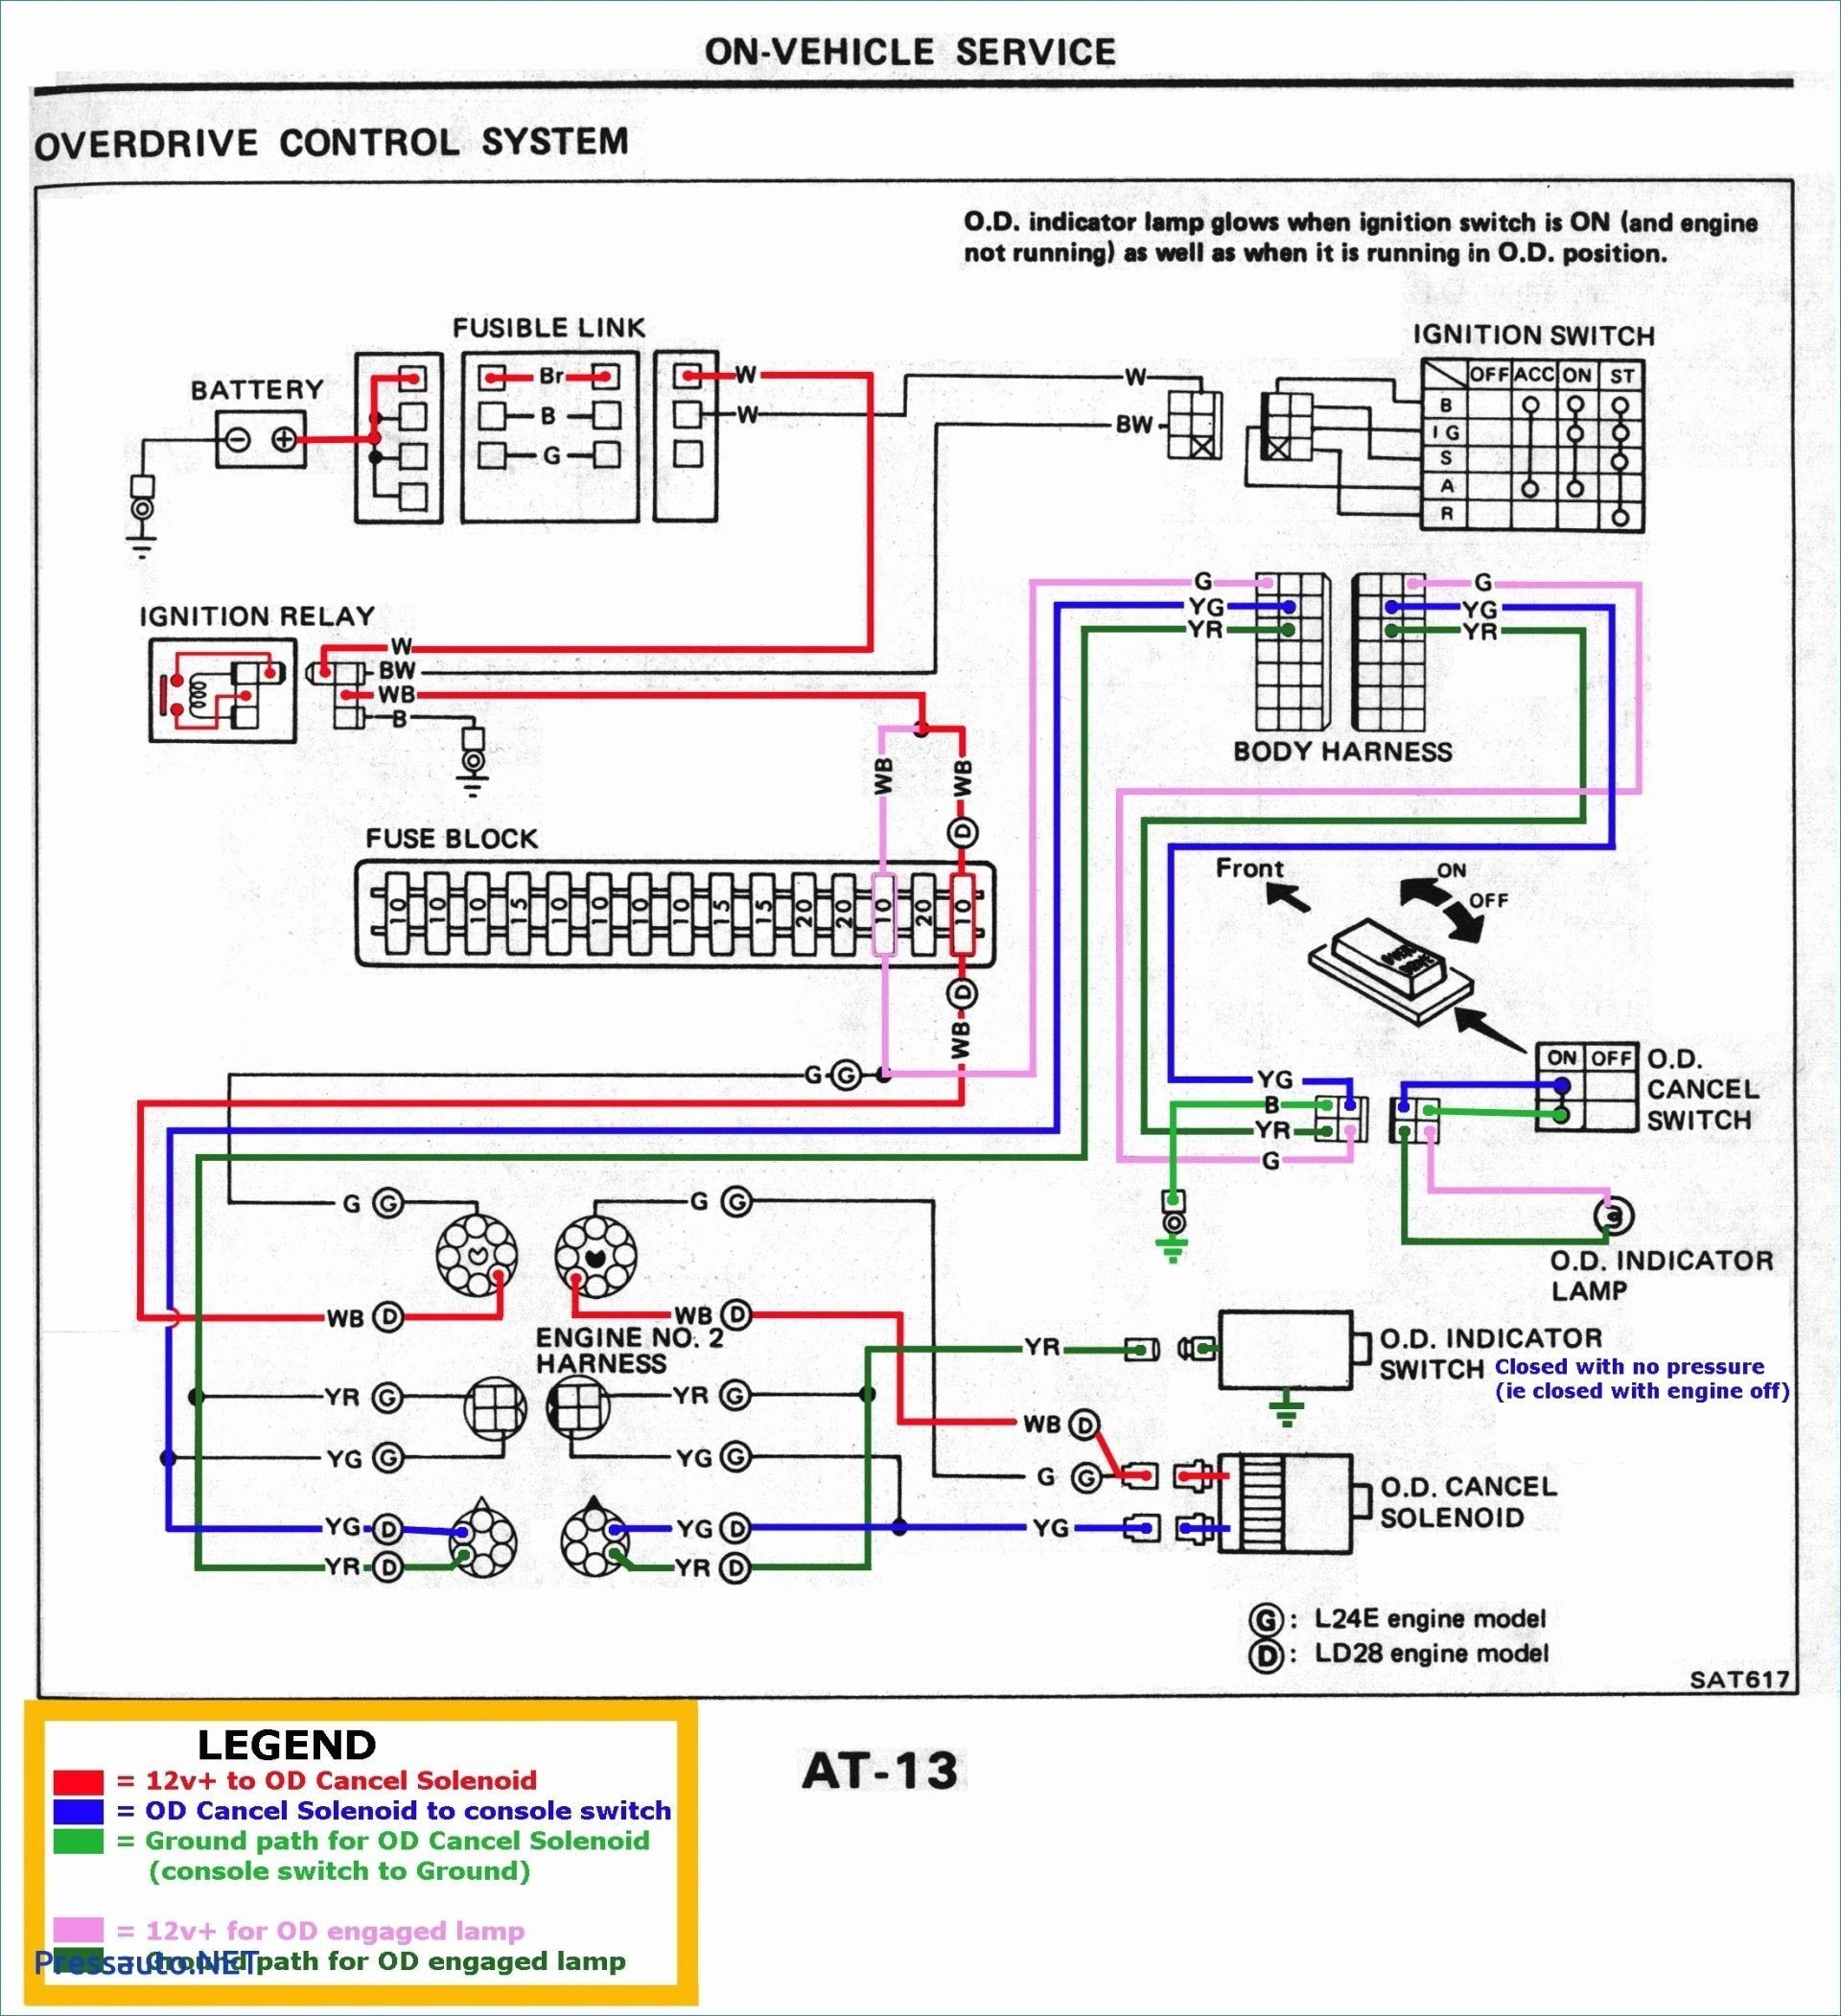 displaying 17gt images for 3 phase induction motor wiring diagram rh 45 77 158 168 440V